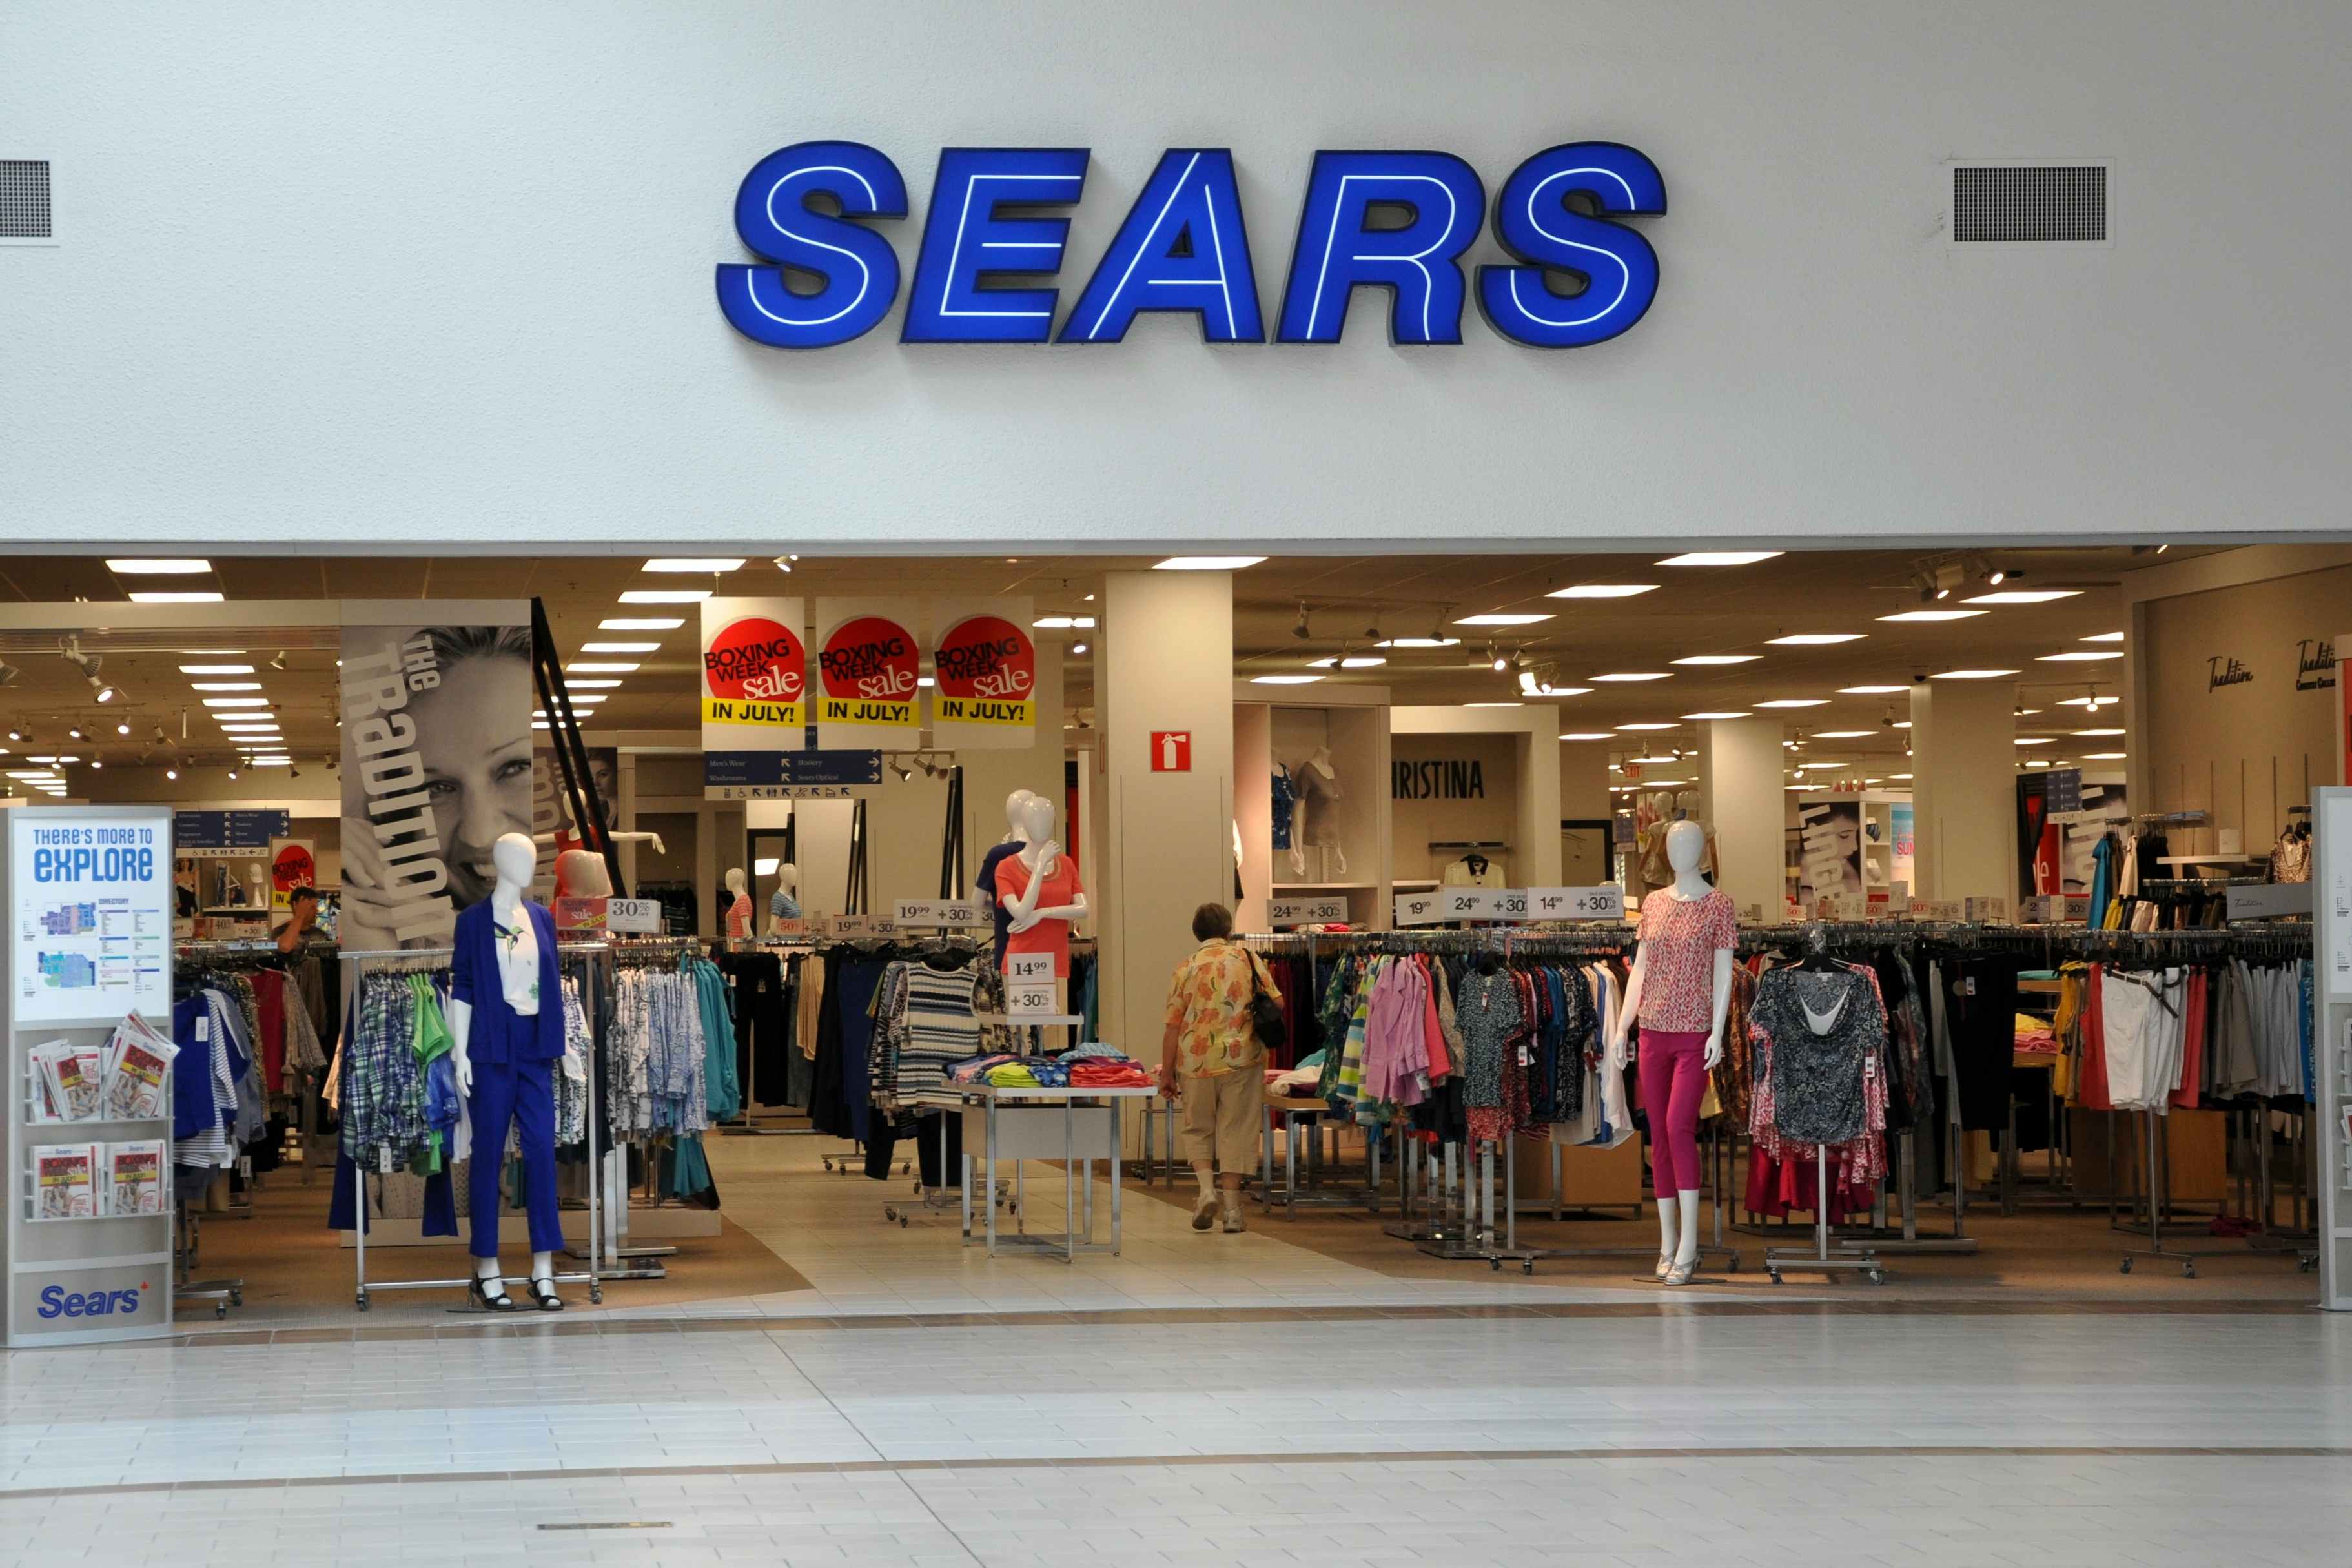 Sears store front entrance inside a mall.